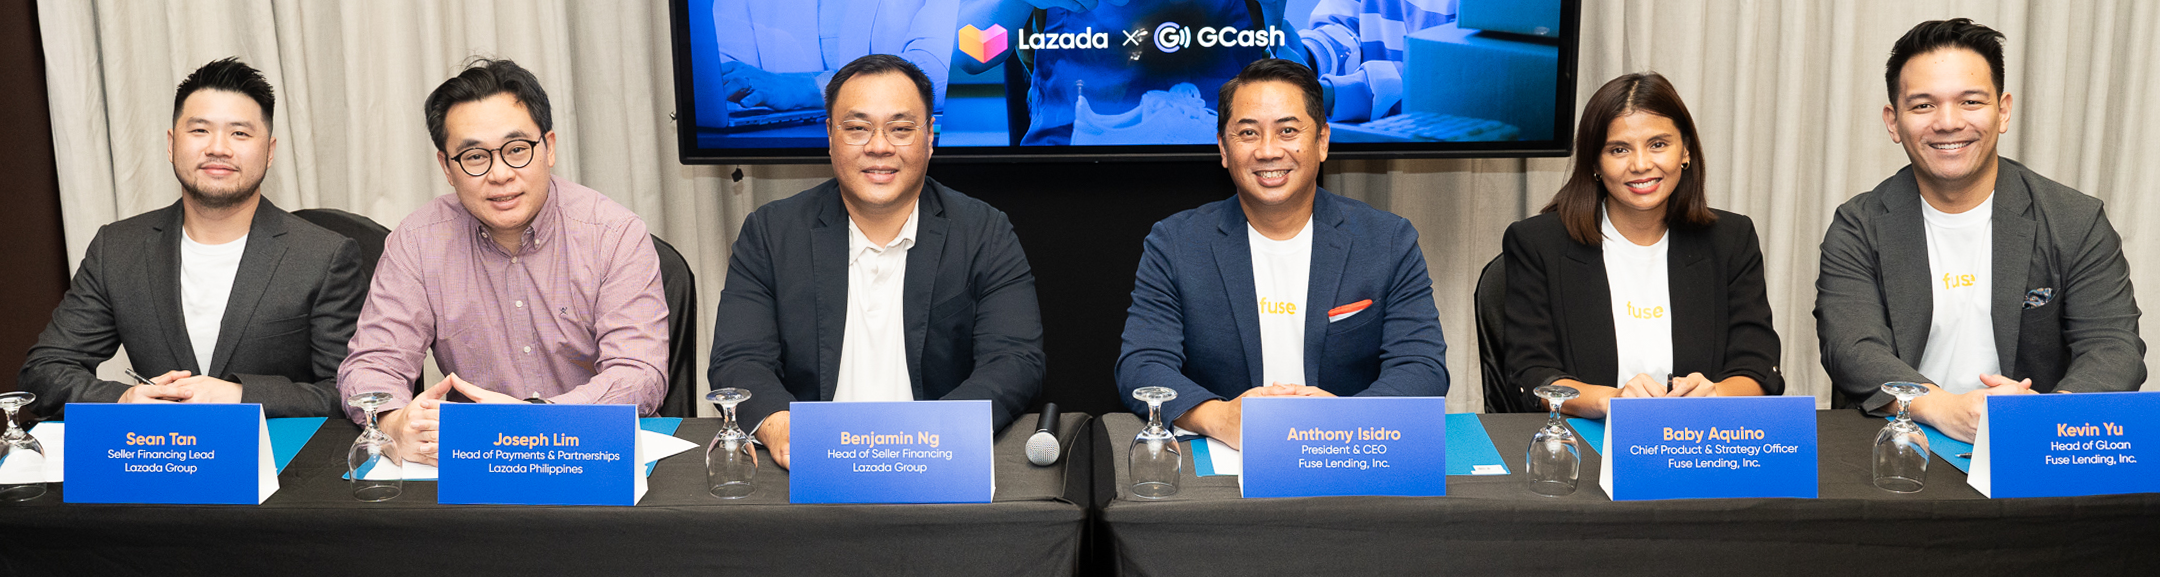 GCash Lending Arm Fuse Partners with Lazada Philippines to Launch Cash Loans for Sellers